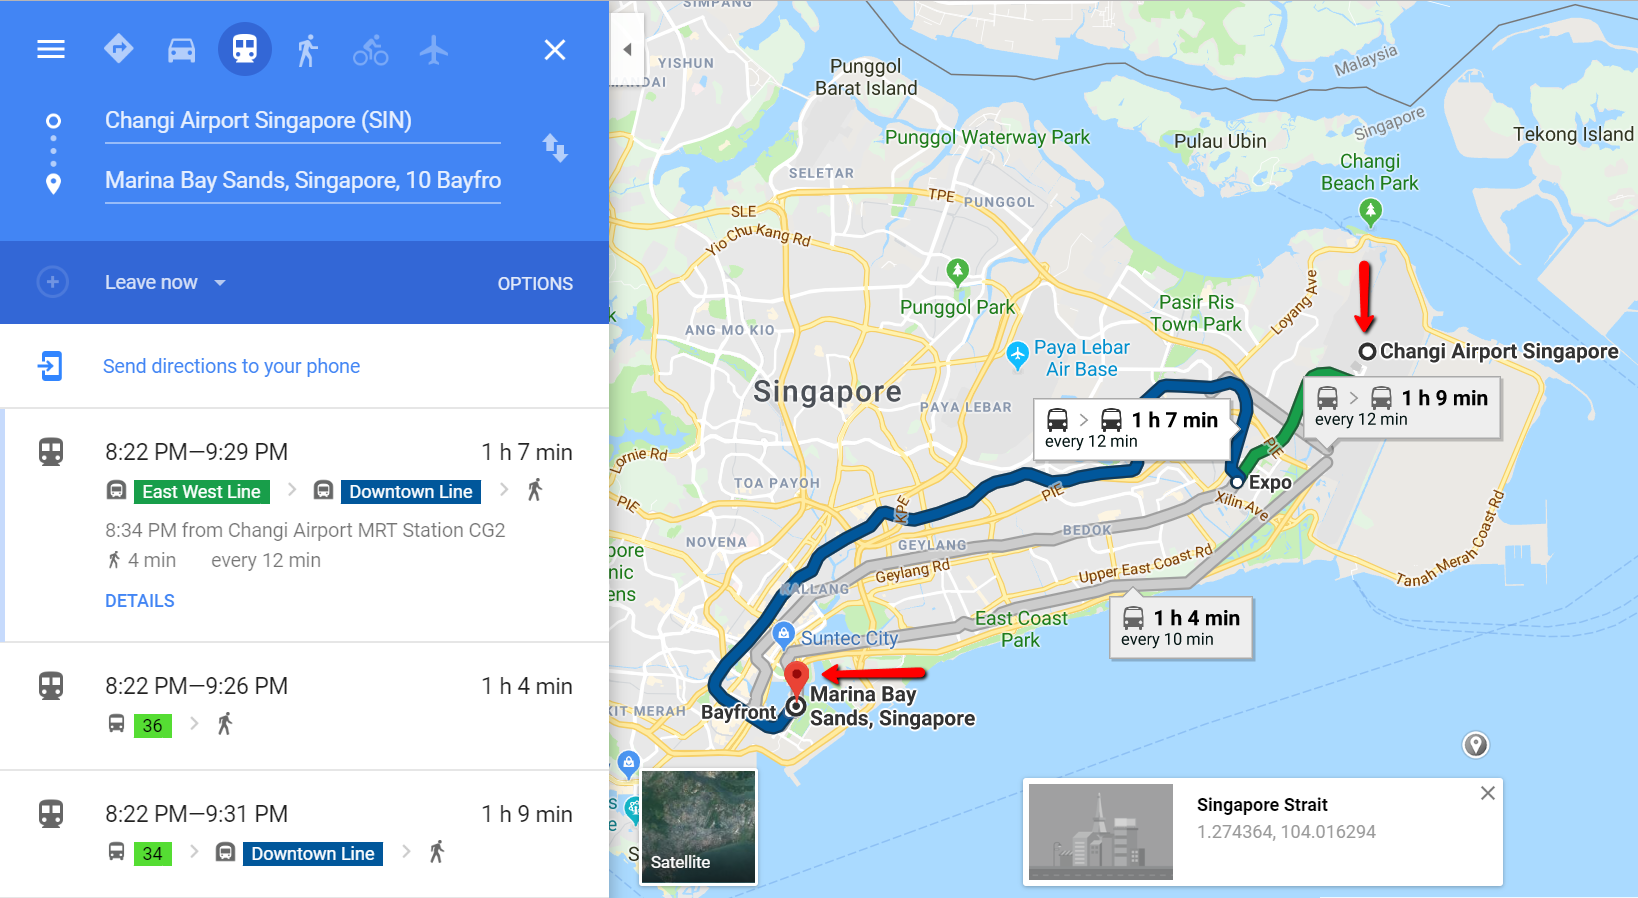 Route from Singapore Airport to City enter, tour on your own